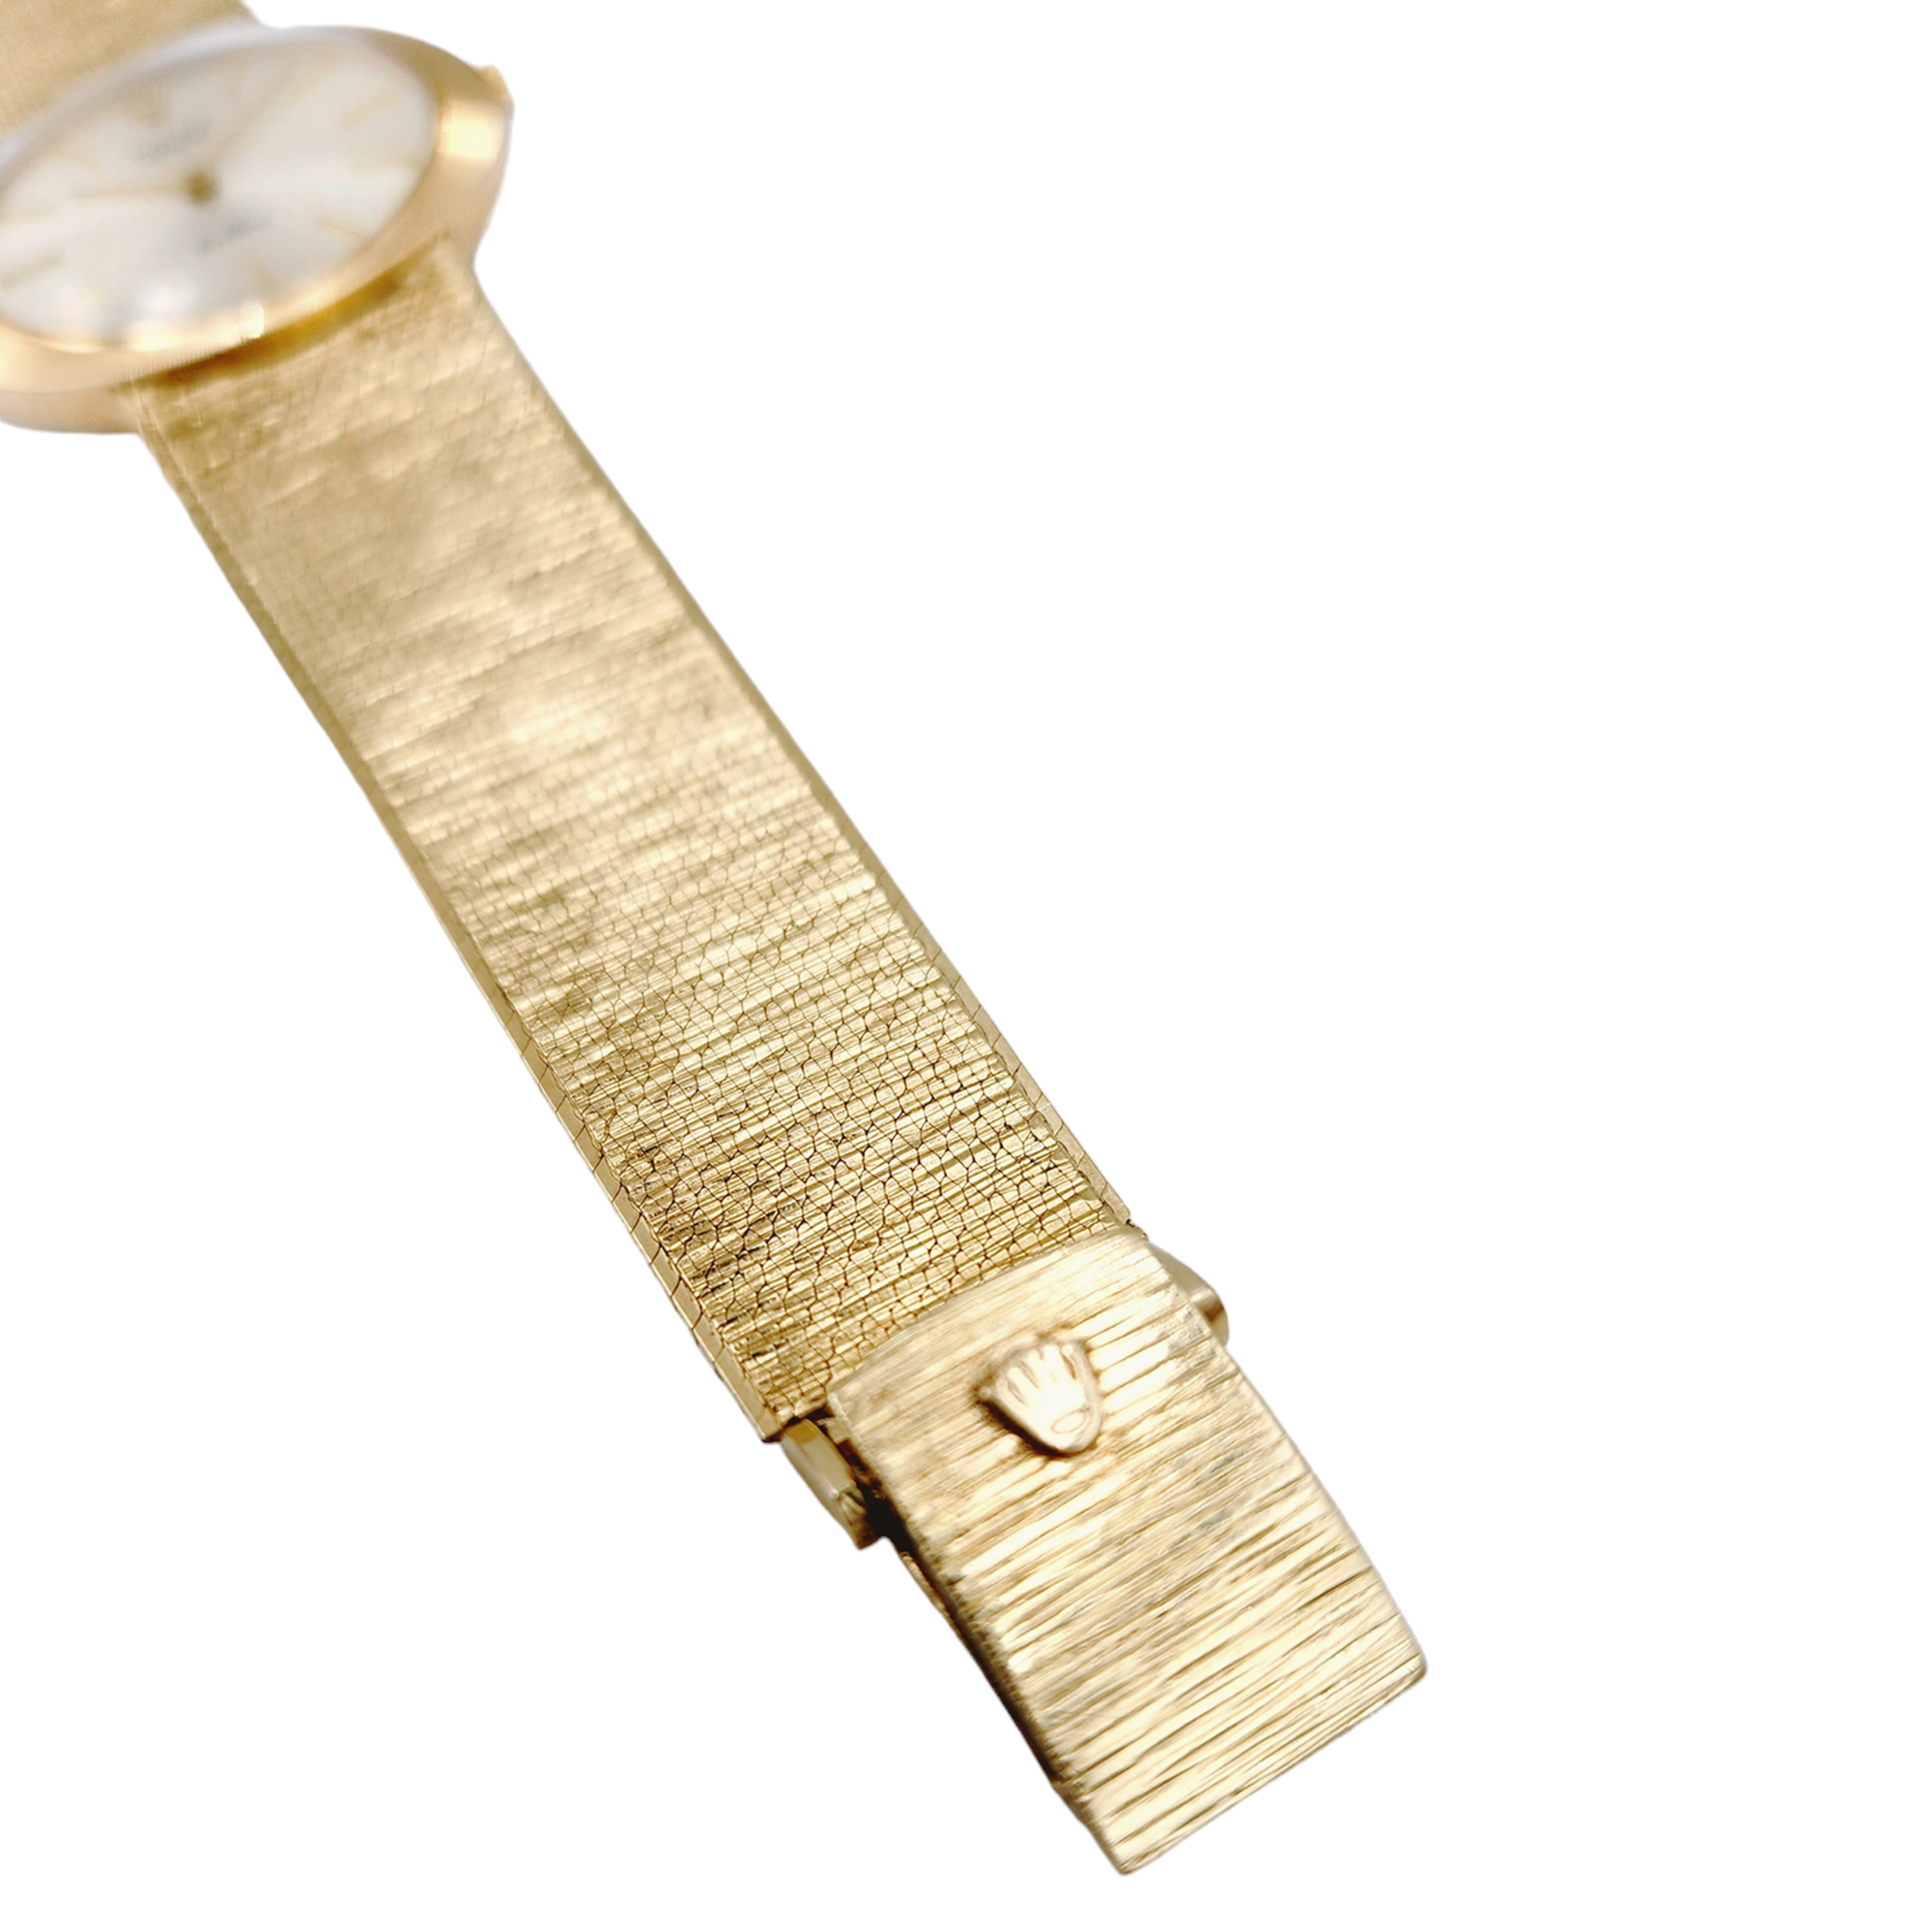 Unisex Rolex Cellini Vintage 14K Yellow Gold Wristwatch w/ Light Champagne Dial & Smooth Bezel. (Pre-Owned)